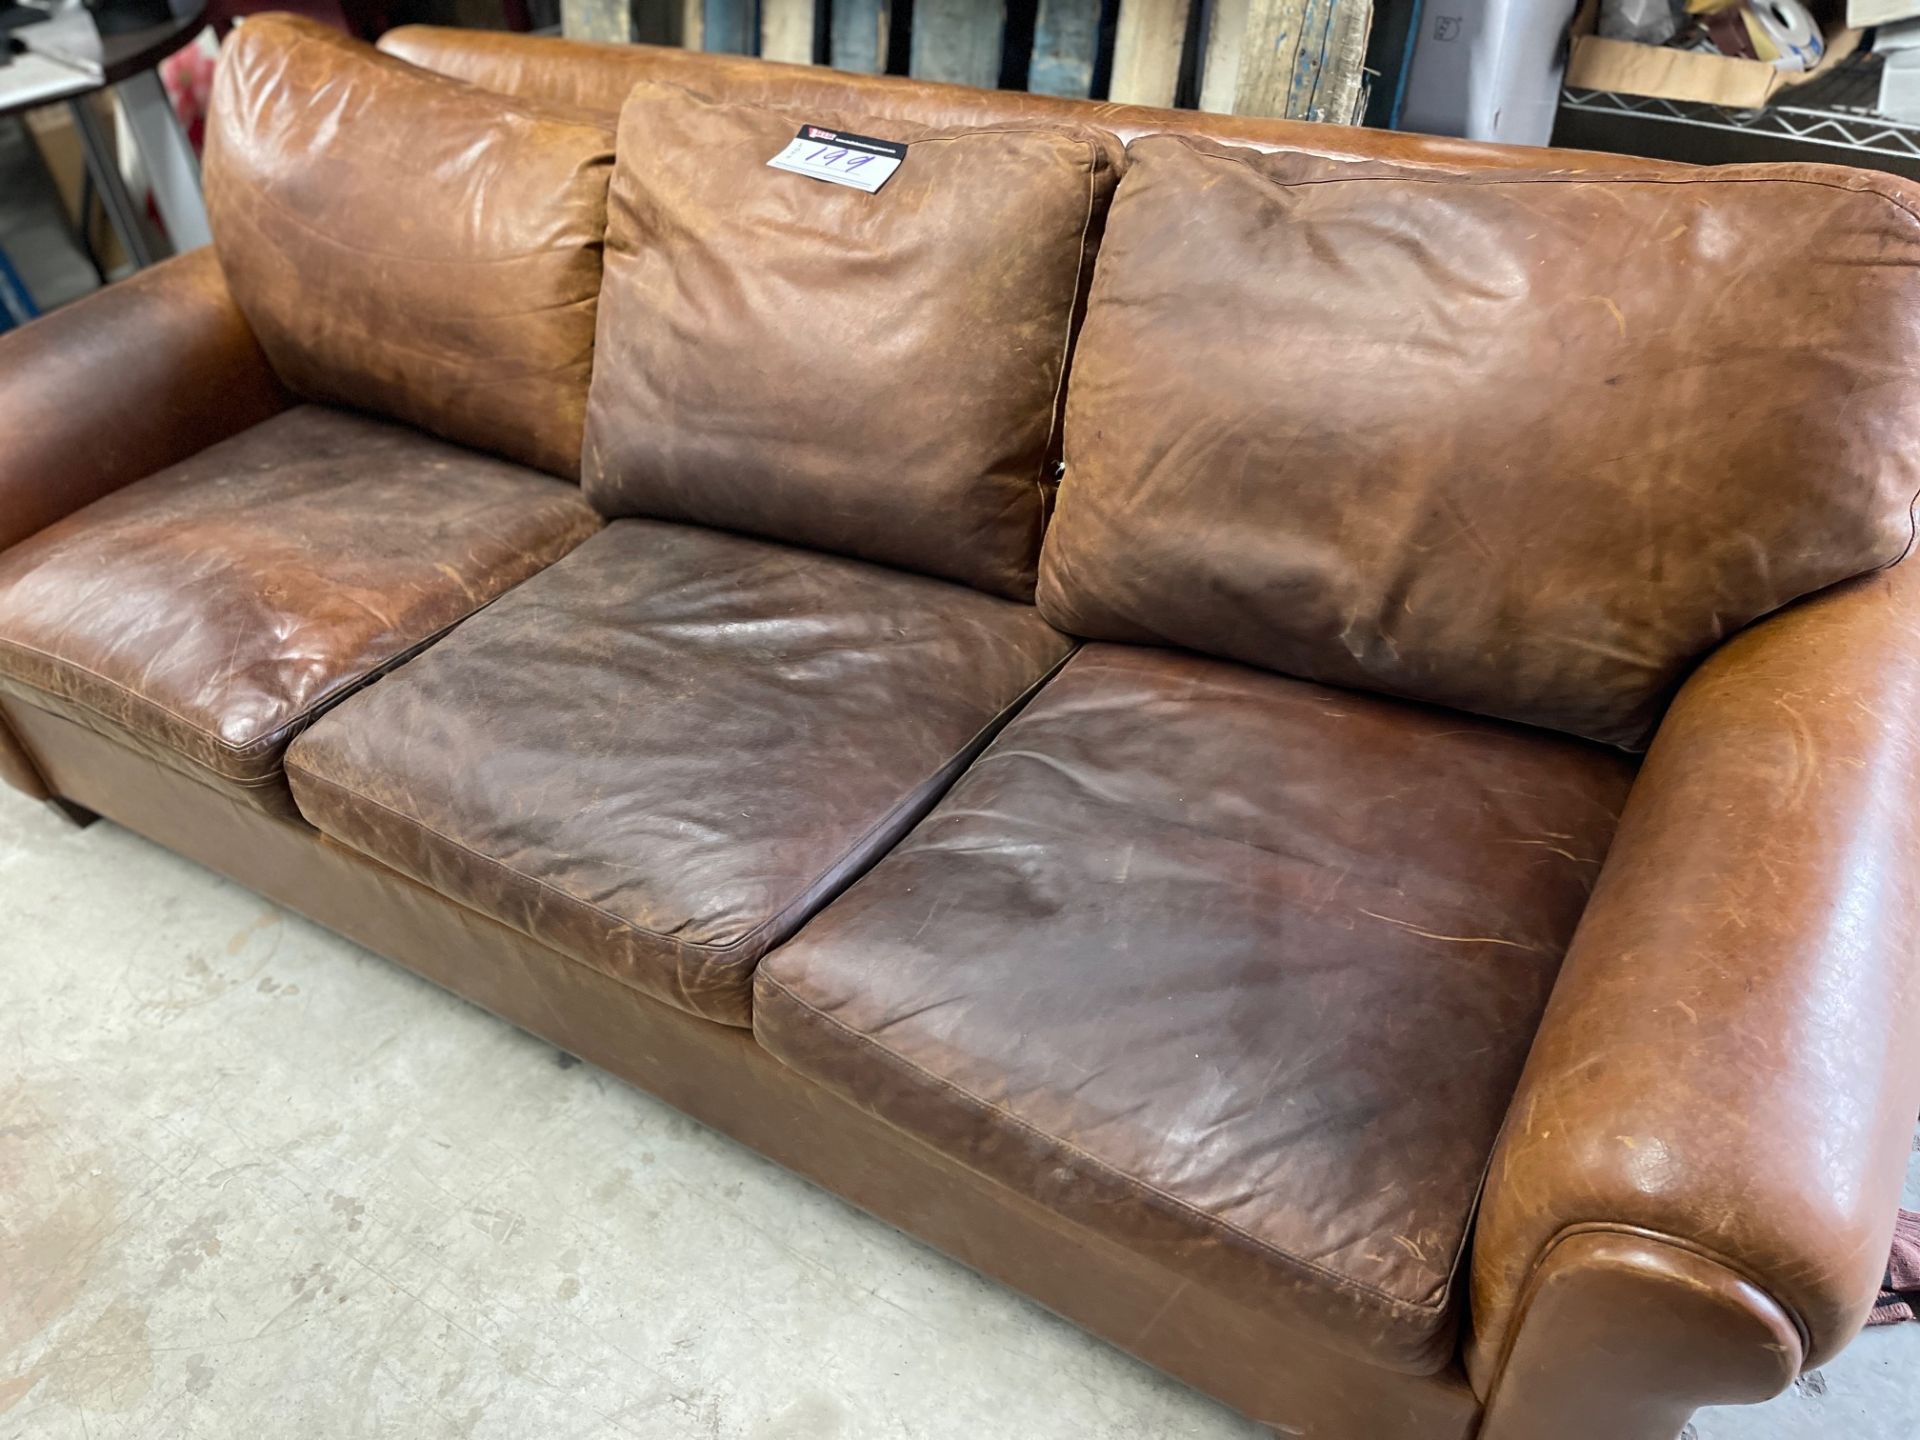 3 SEATER RAWHIDE LEATHER SOFA - Image 5 of 6